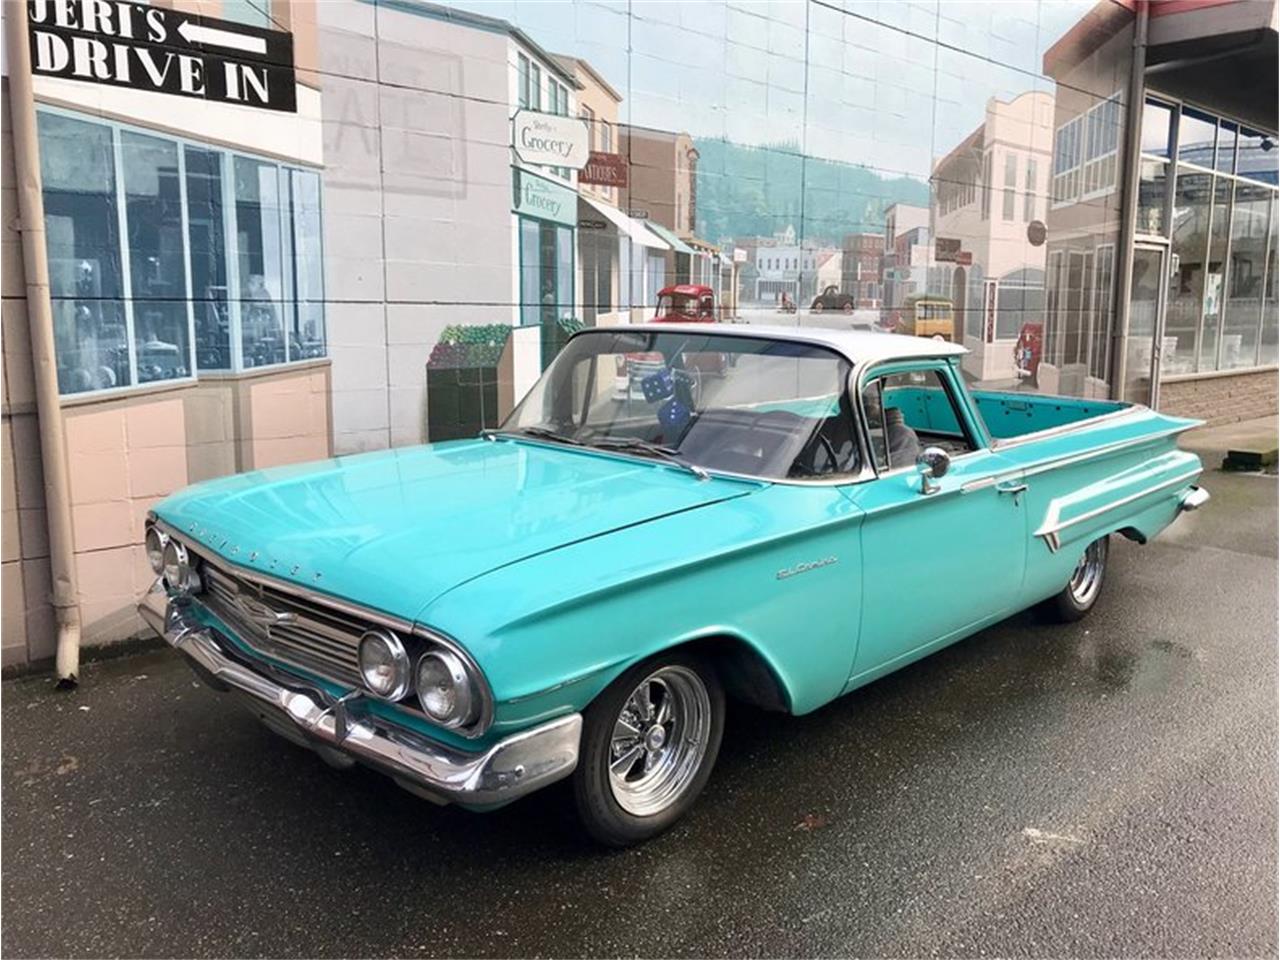 turquoise 1960 Chevrolet El Camino for sale located in Seattle, Washington ...